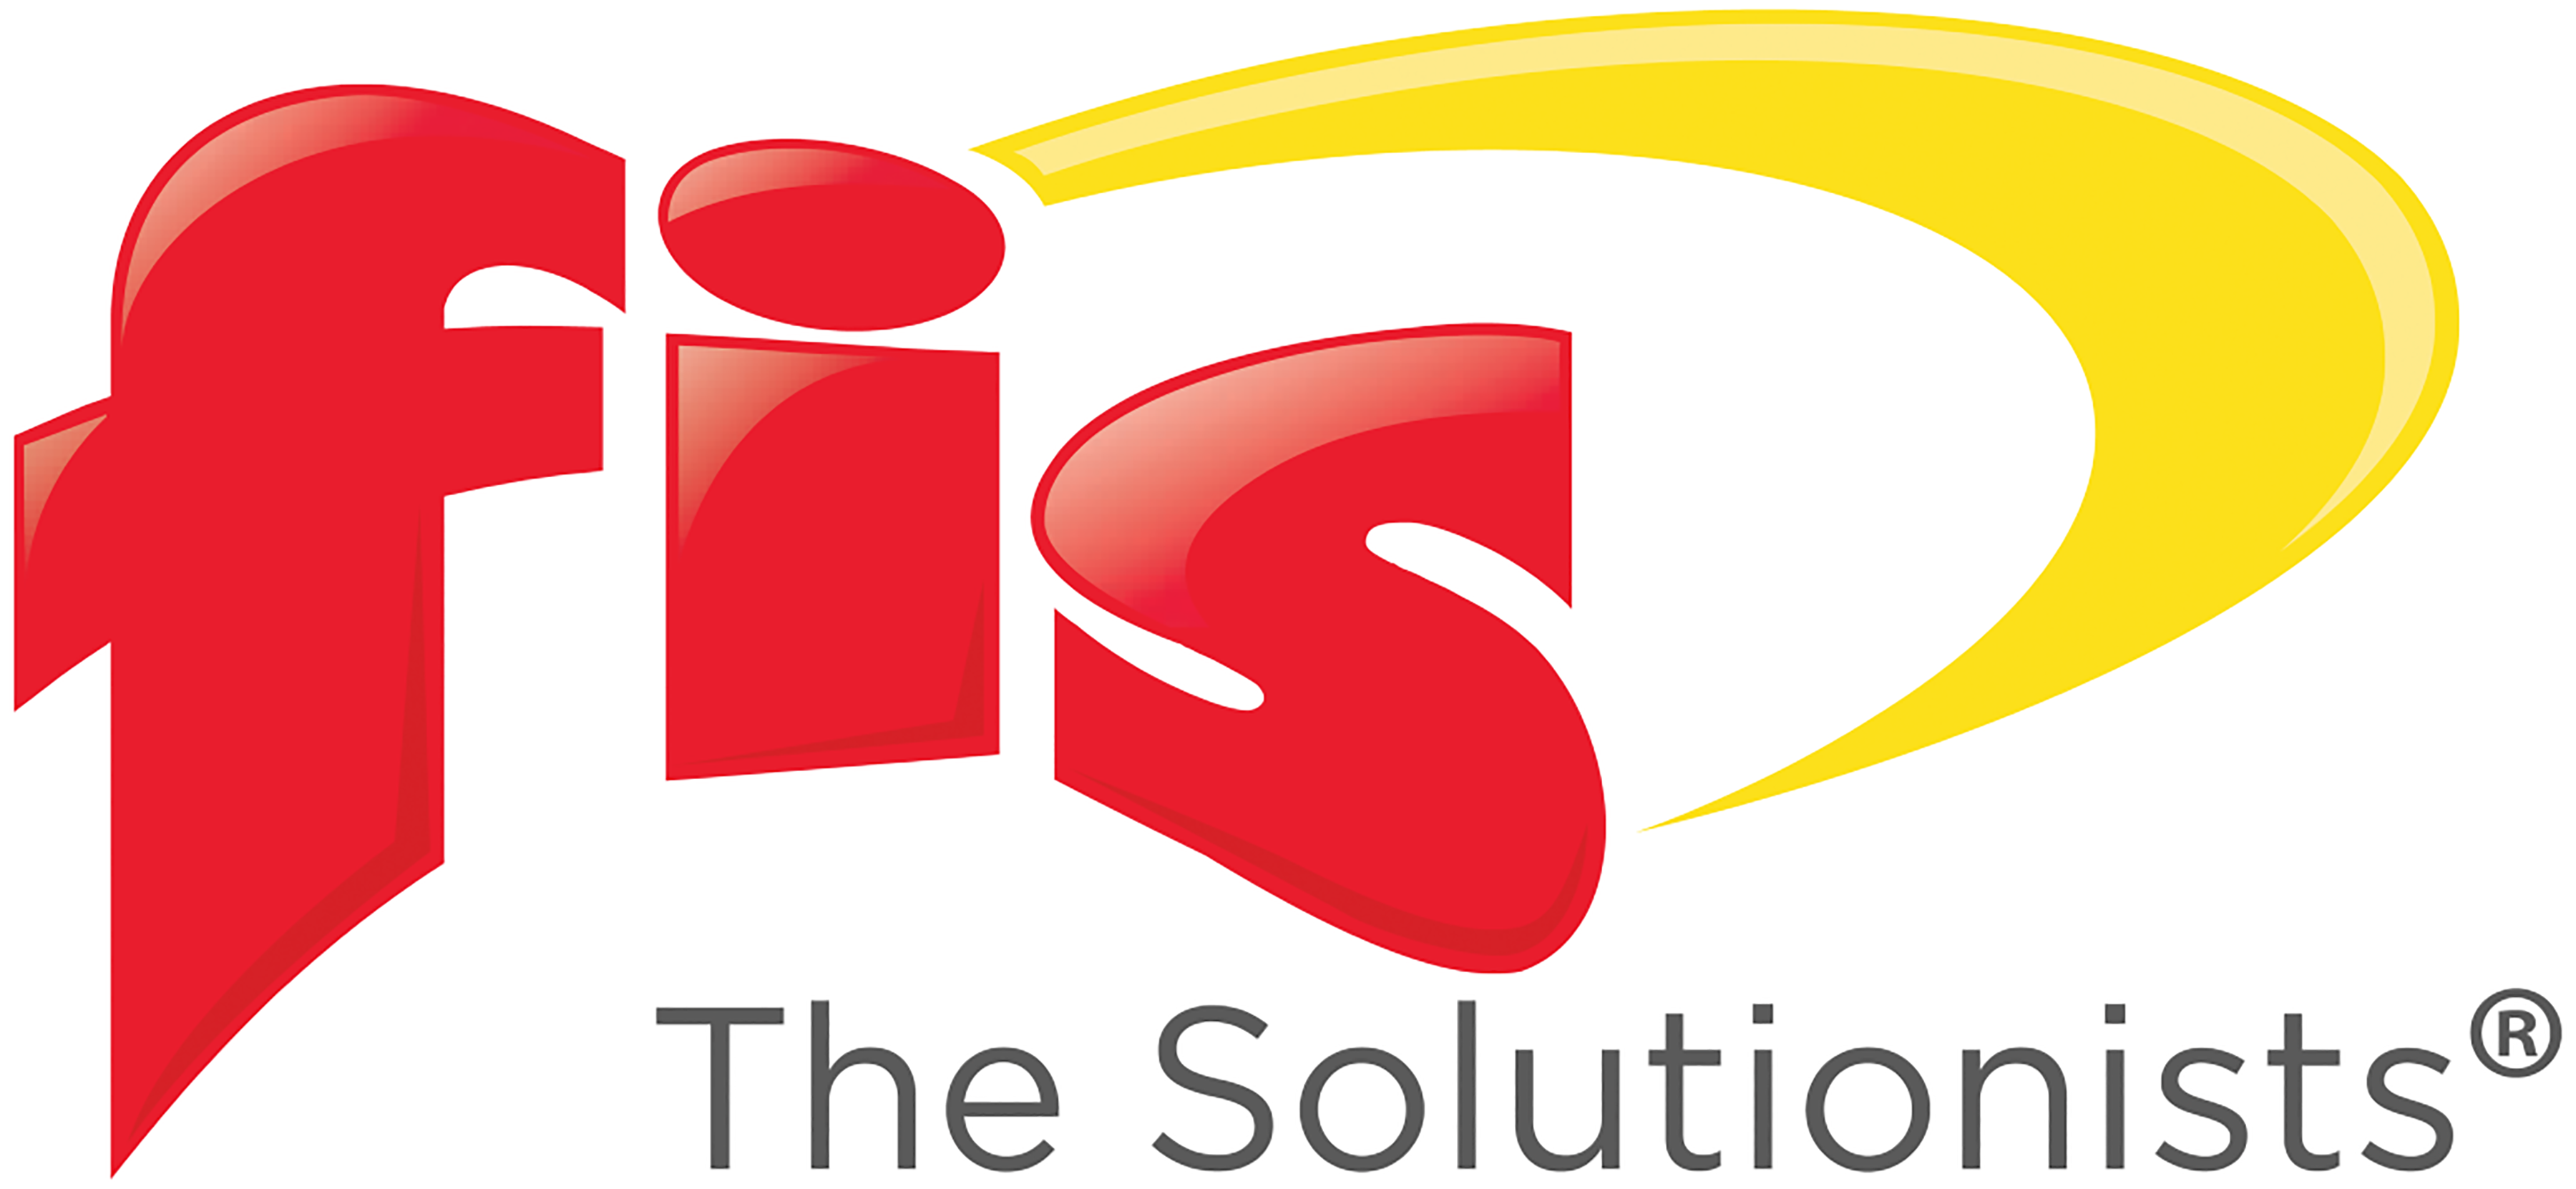 thumbnail FIS Solutionists Logo R Full Color